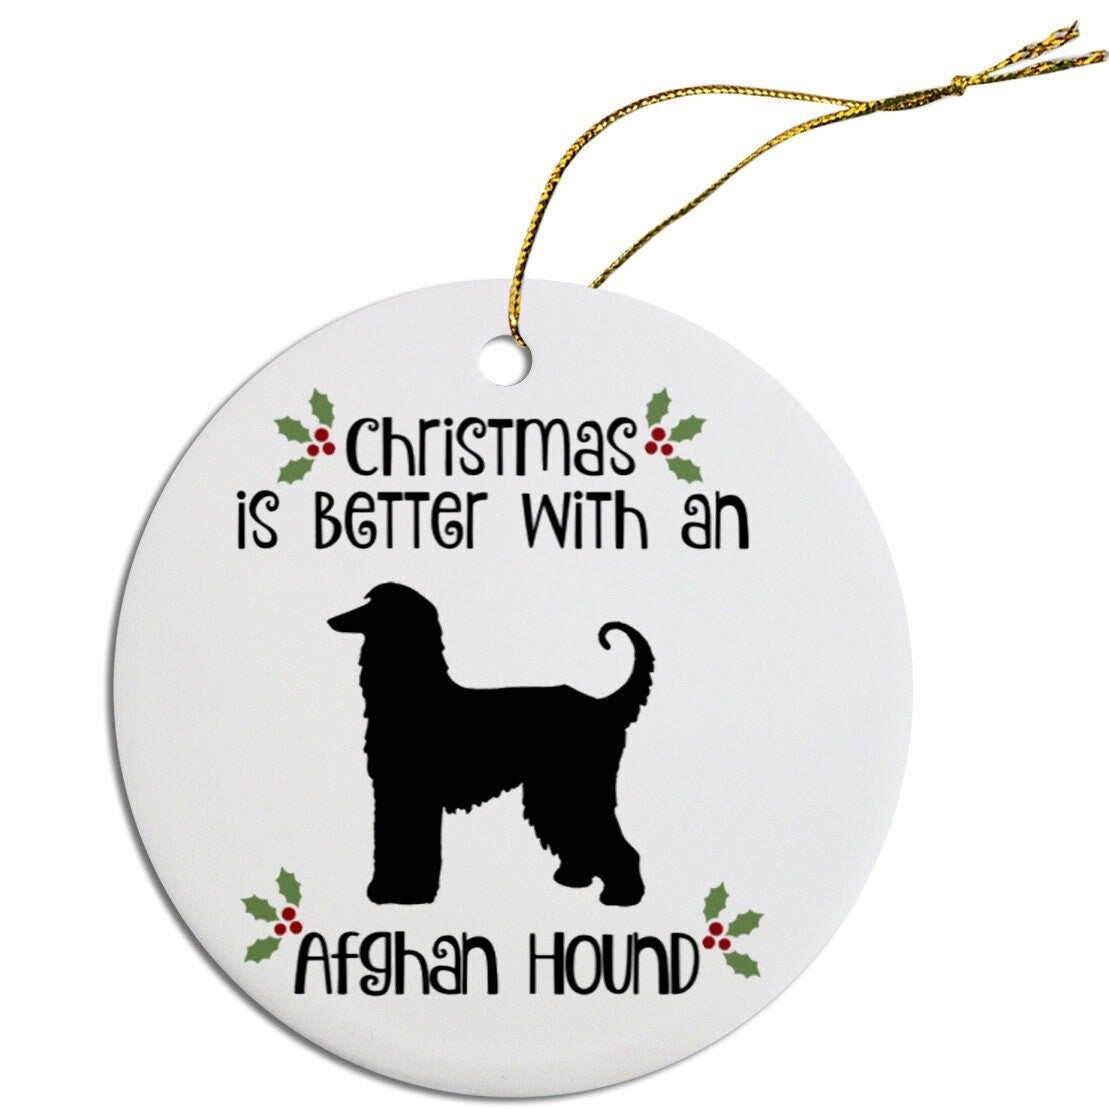 Dog Breed Specific Round Christmas Ornament, "Afghan Hound"